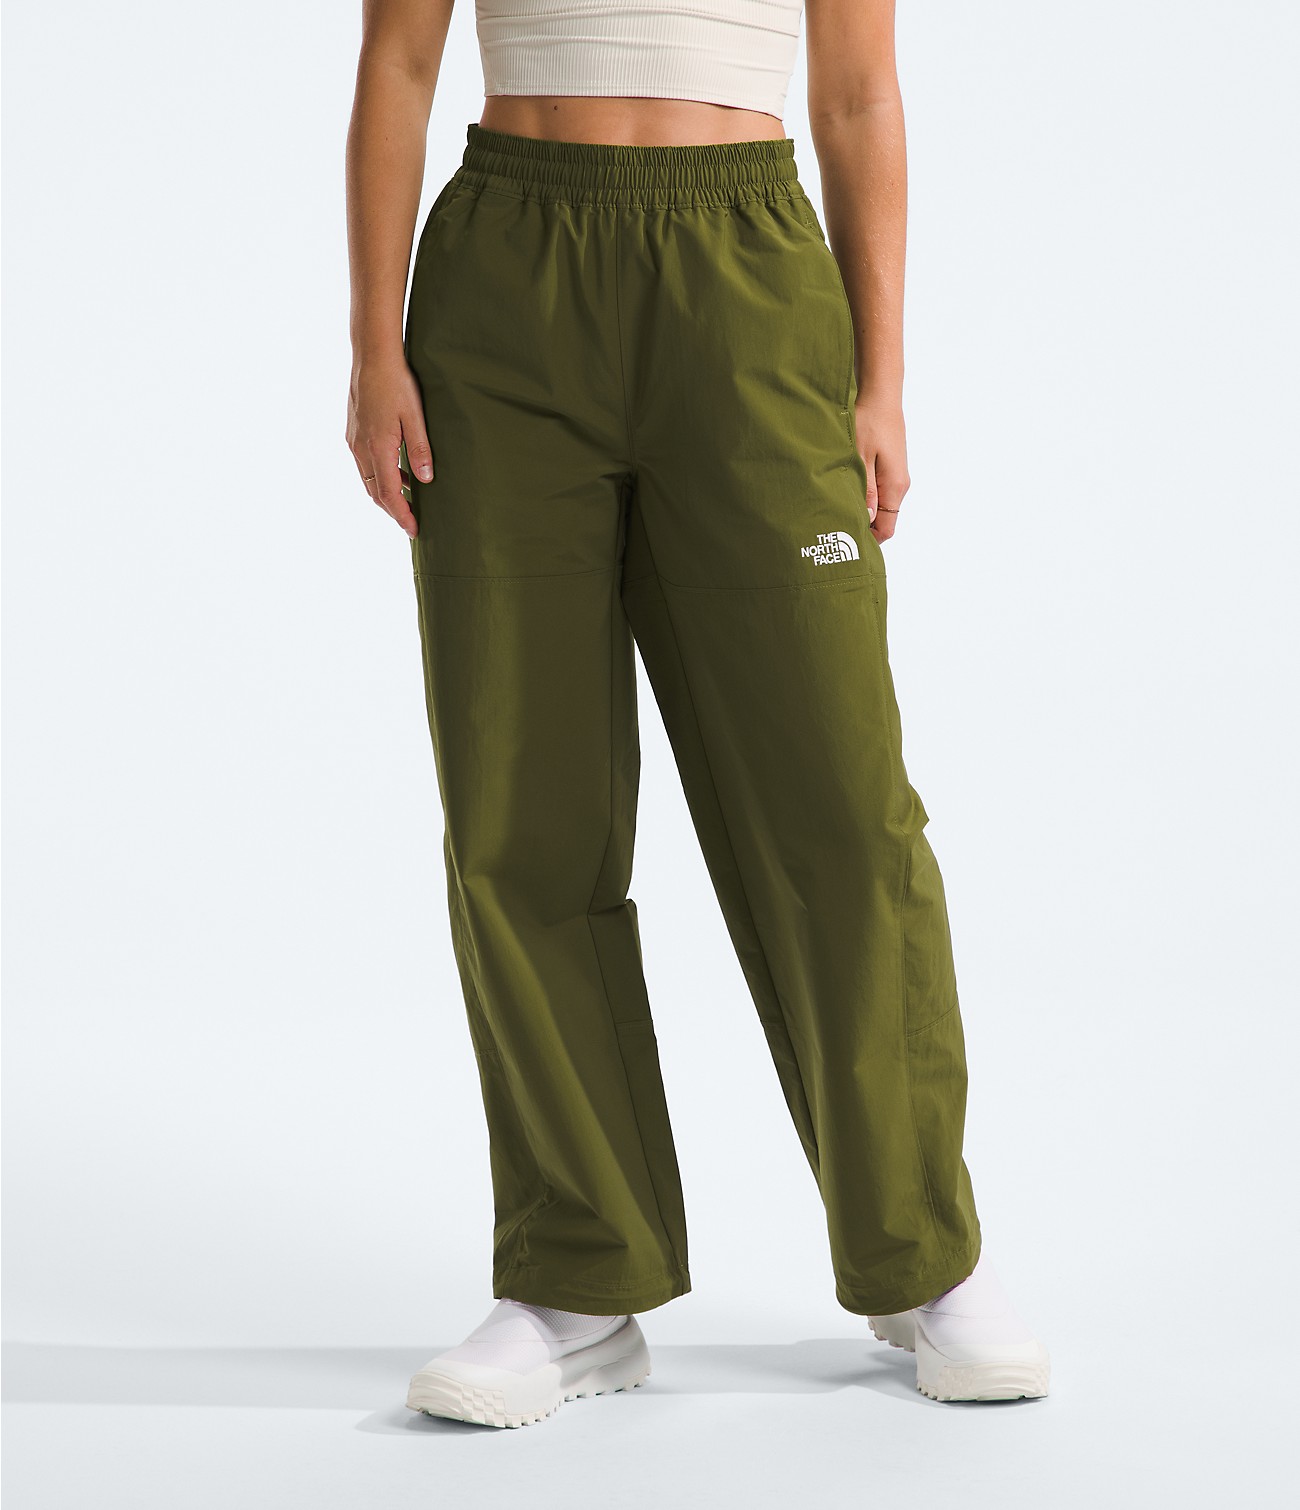 Women’s TNF™ Easy Wind Pants | The North Face